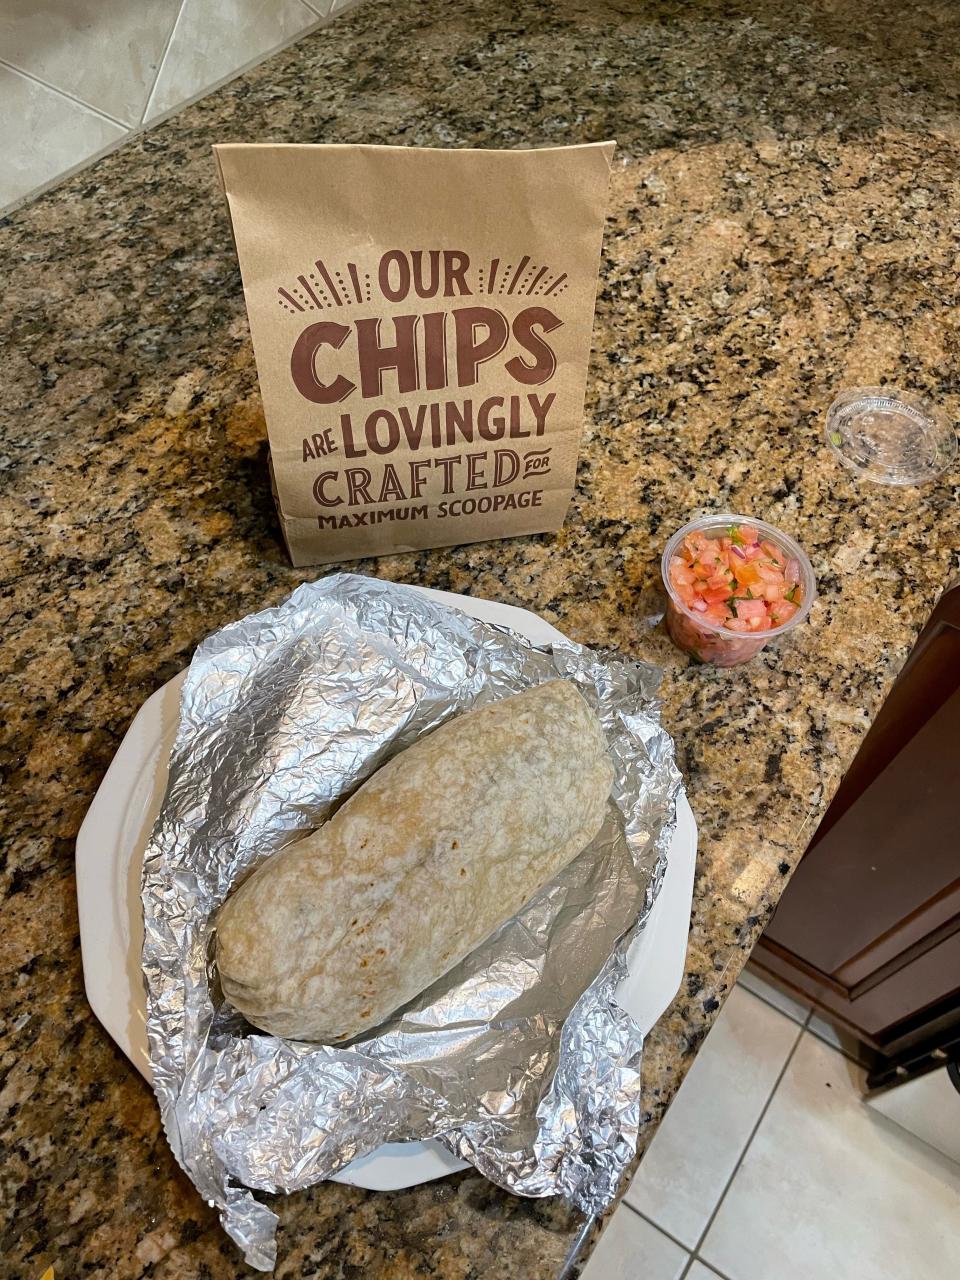 A 54-year-old Fayetteville pharmacist eats a Chipotle burrito with pico de gallo.